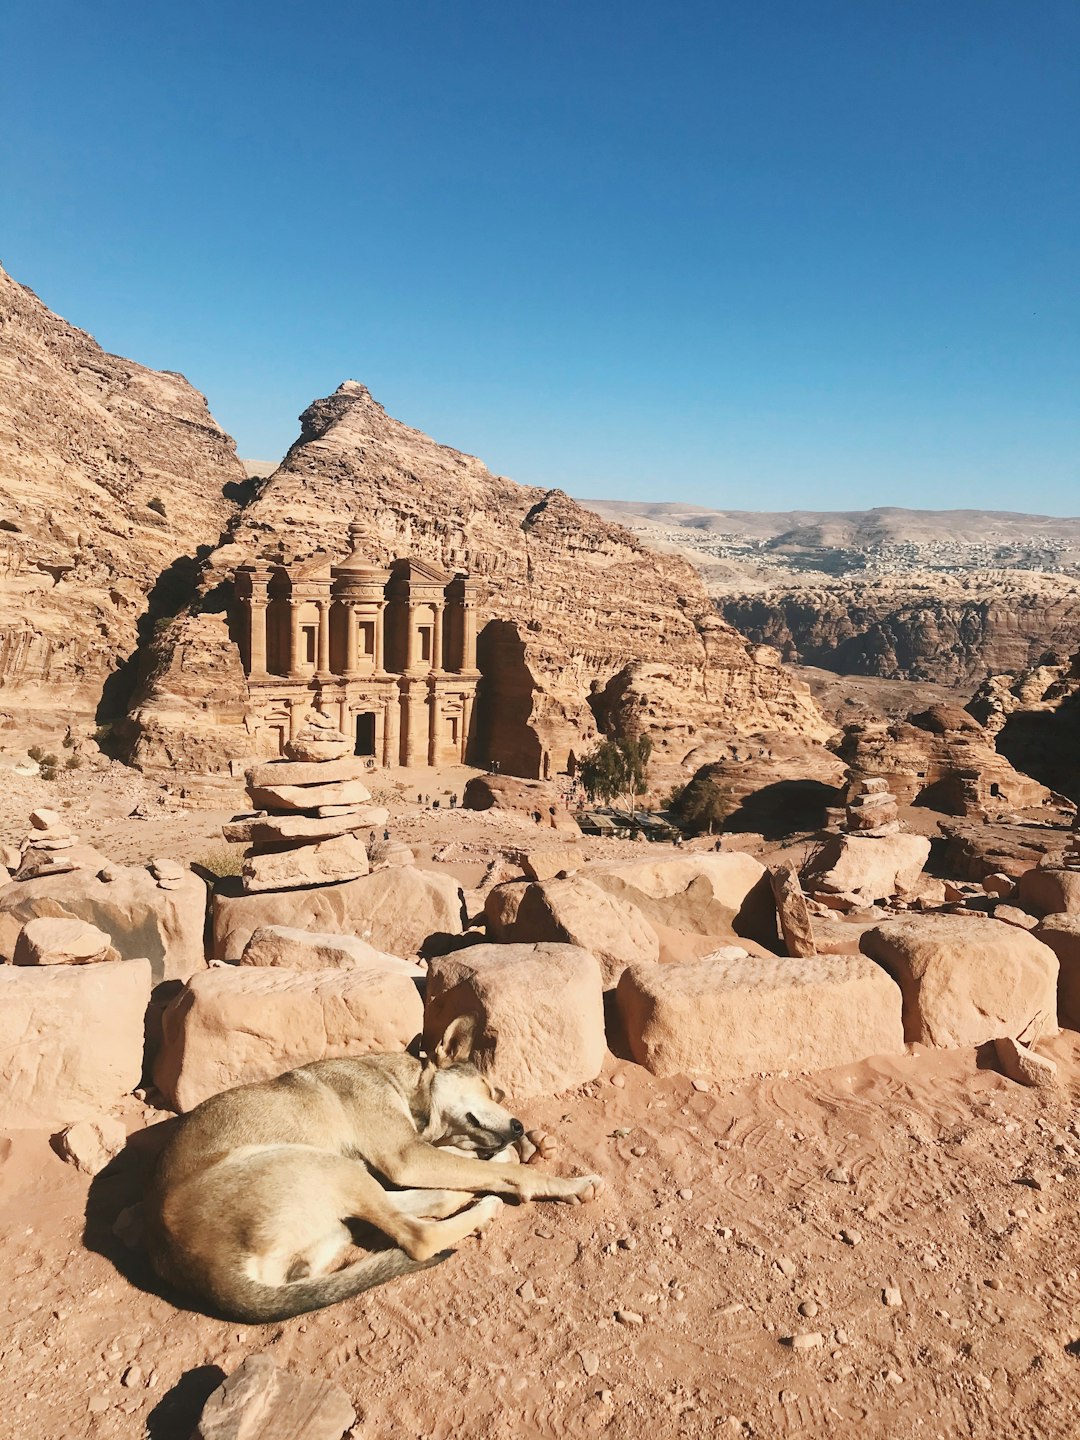 dog lying on sand near Petra, Egypt during day